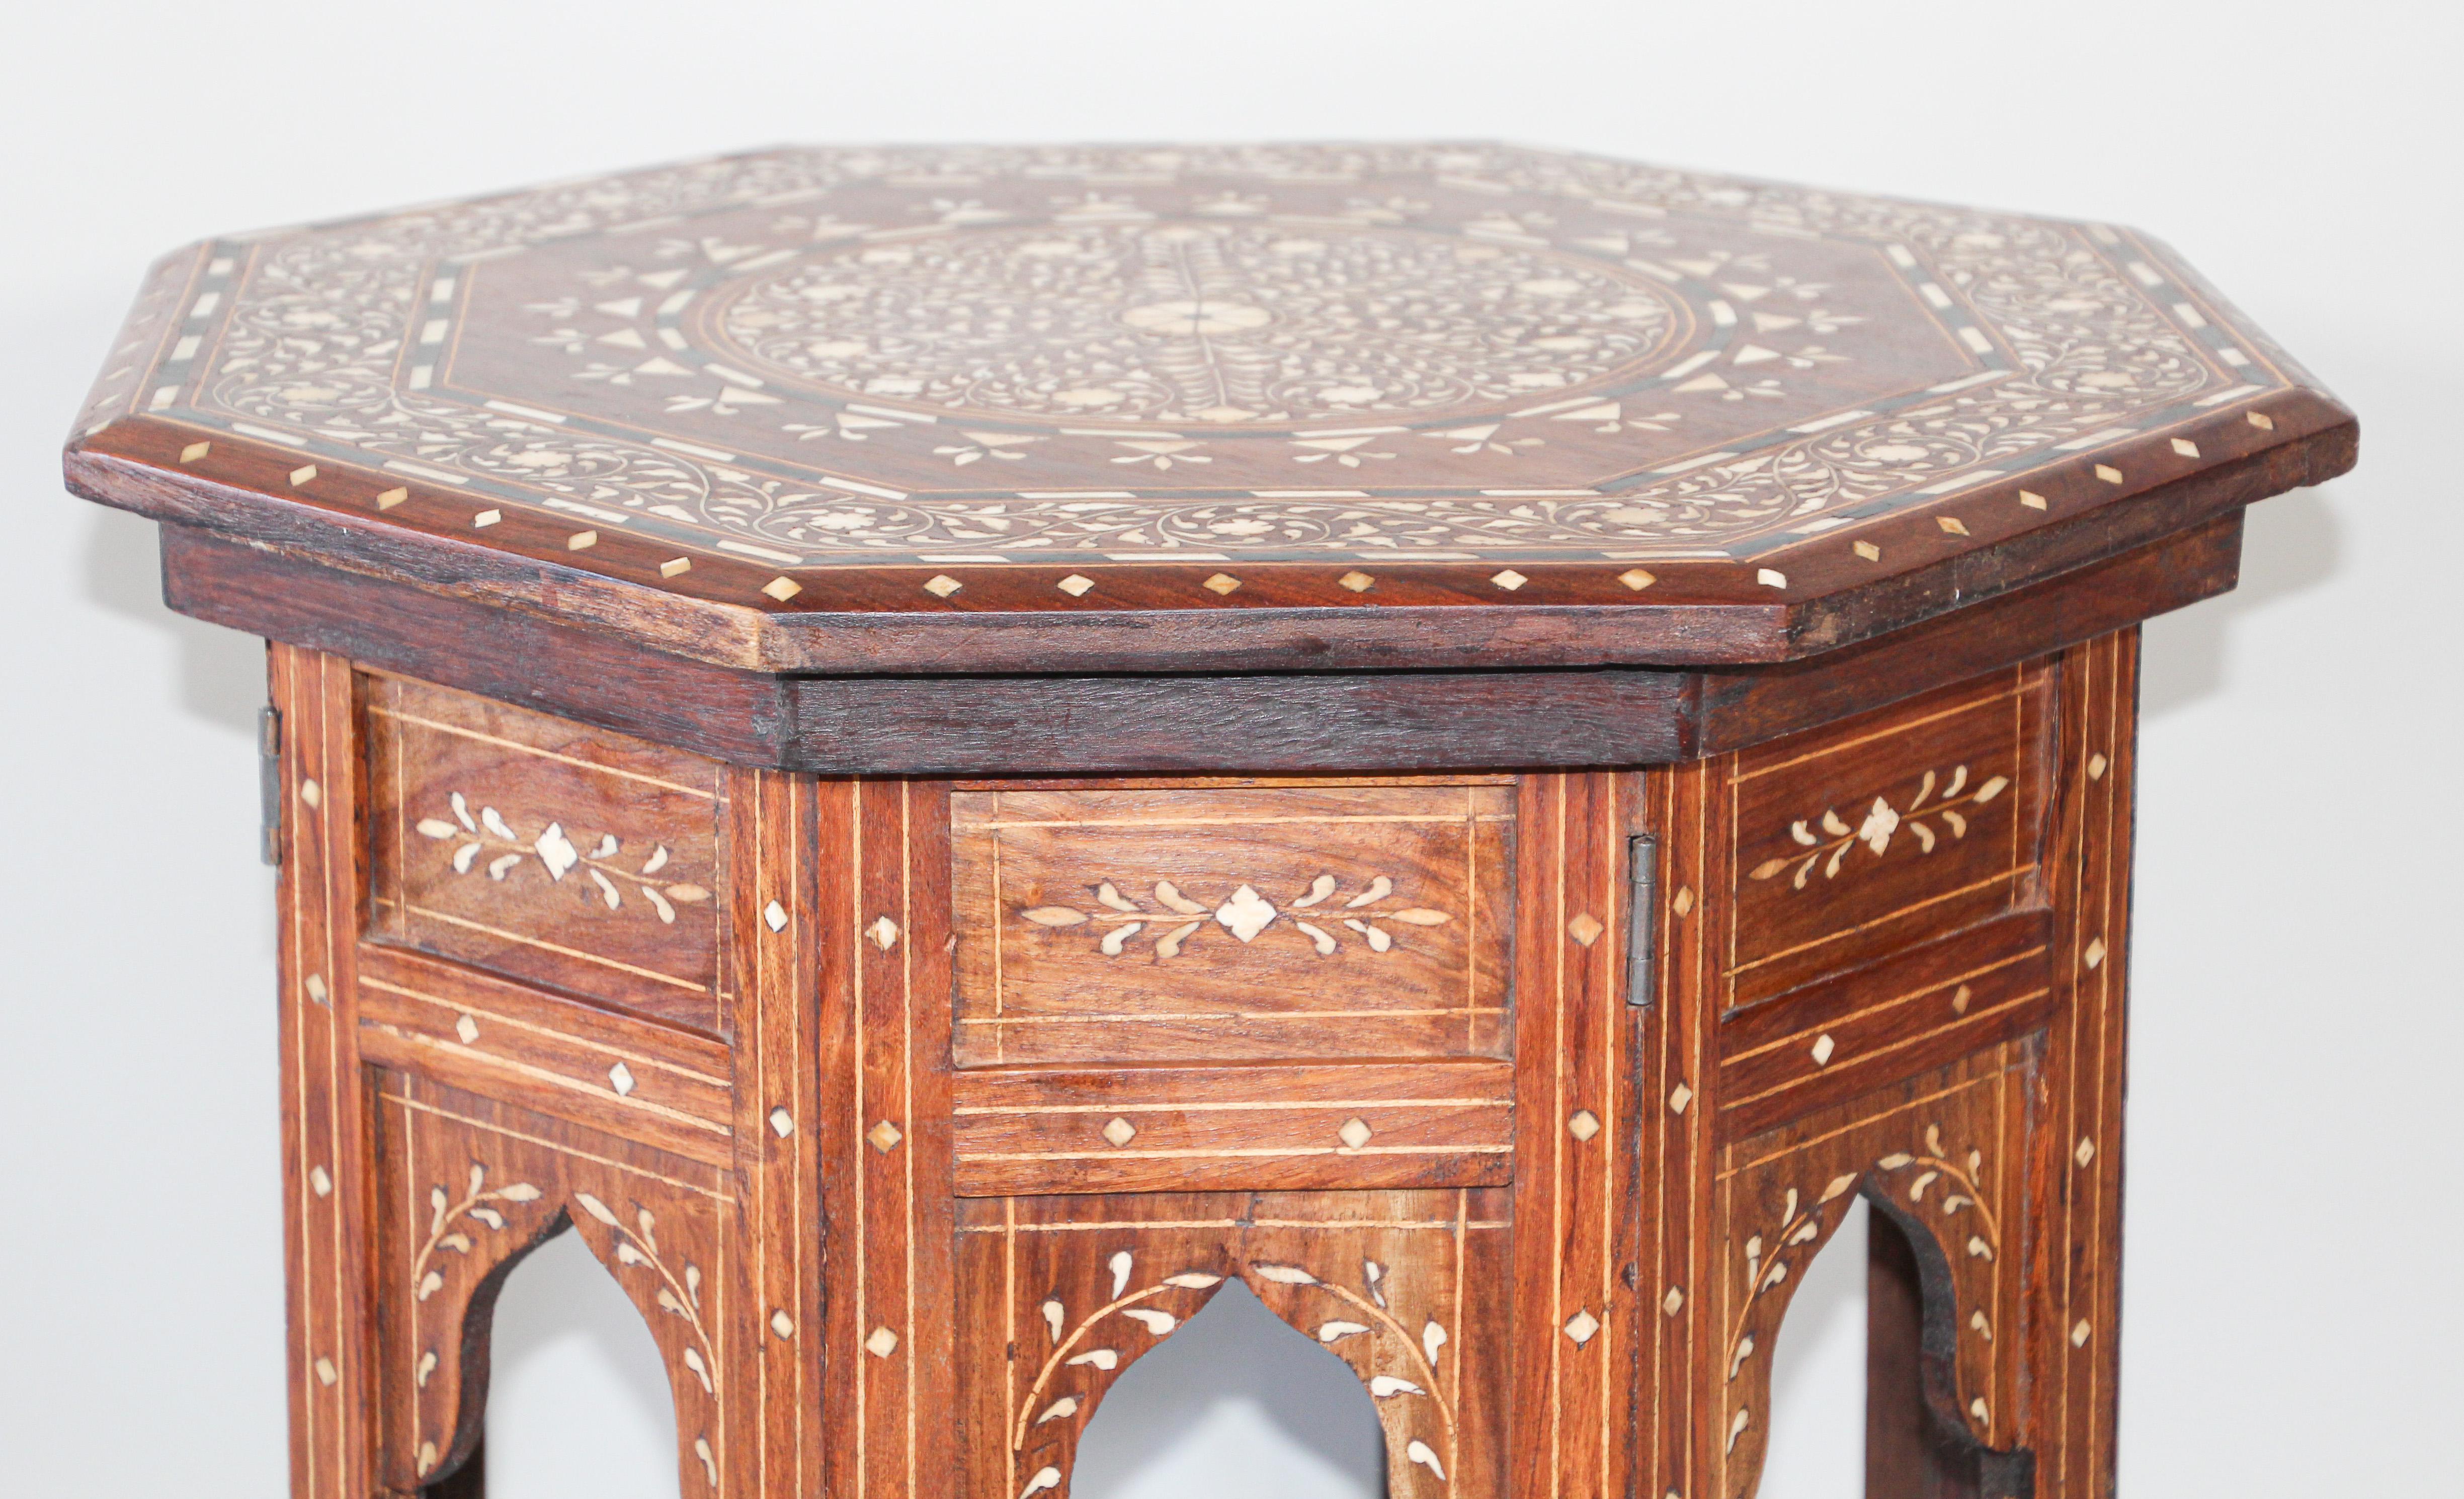 Fine and elegant Anglo Indian folding Moorish Teak Octagonal Open Arch Taboret side table.
A late 19th century Anglo-Indian wood table finely carved and inlaid with bone details designs.
The octagonal top inlay featuring an eight-sided central